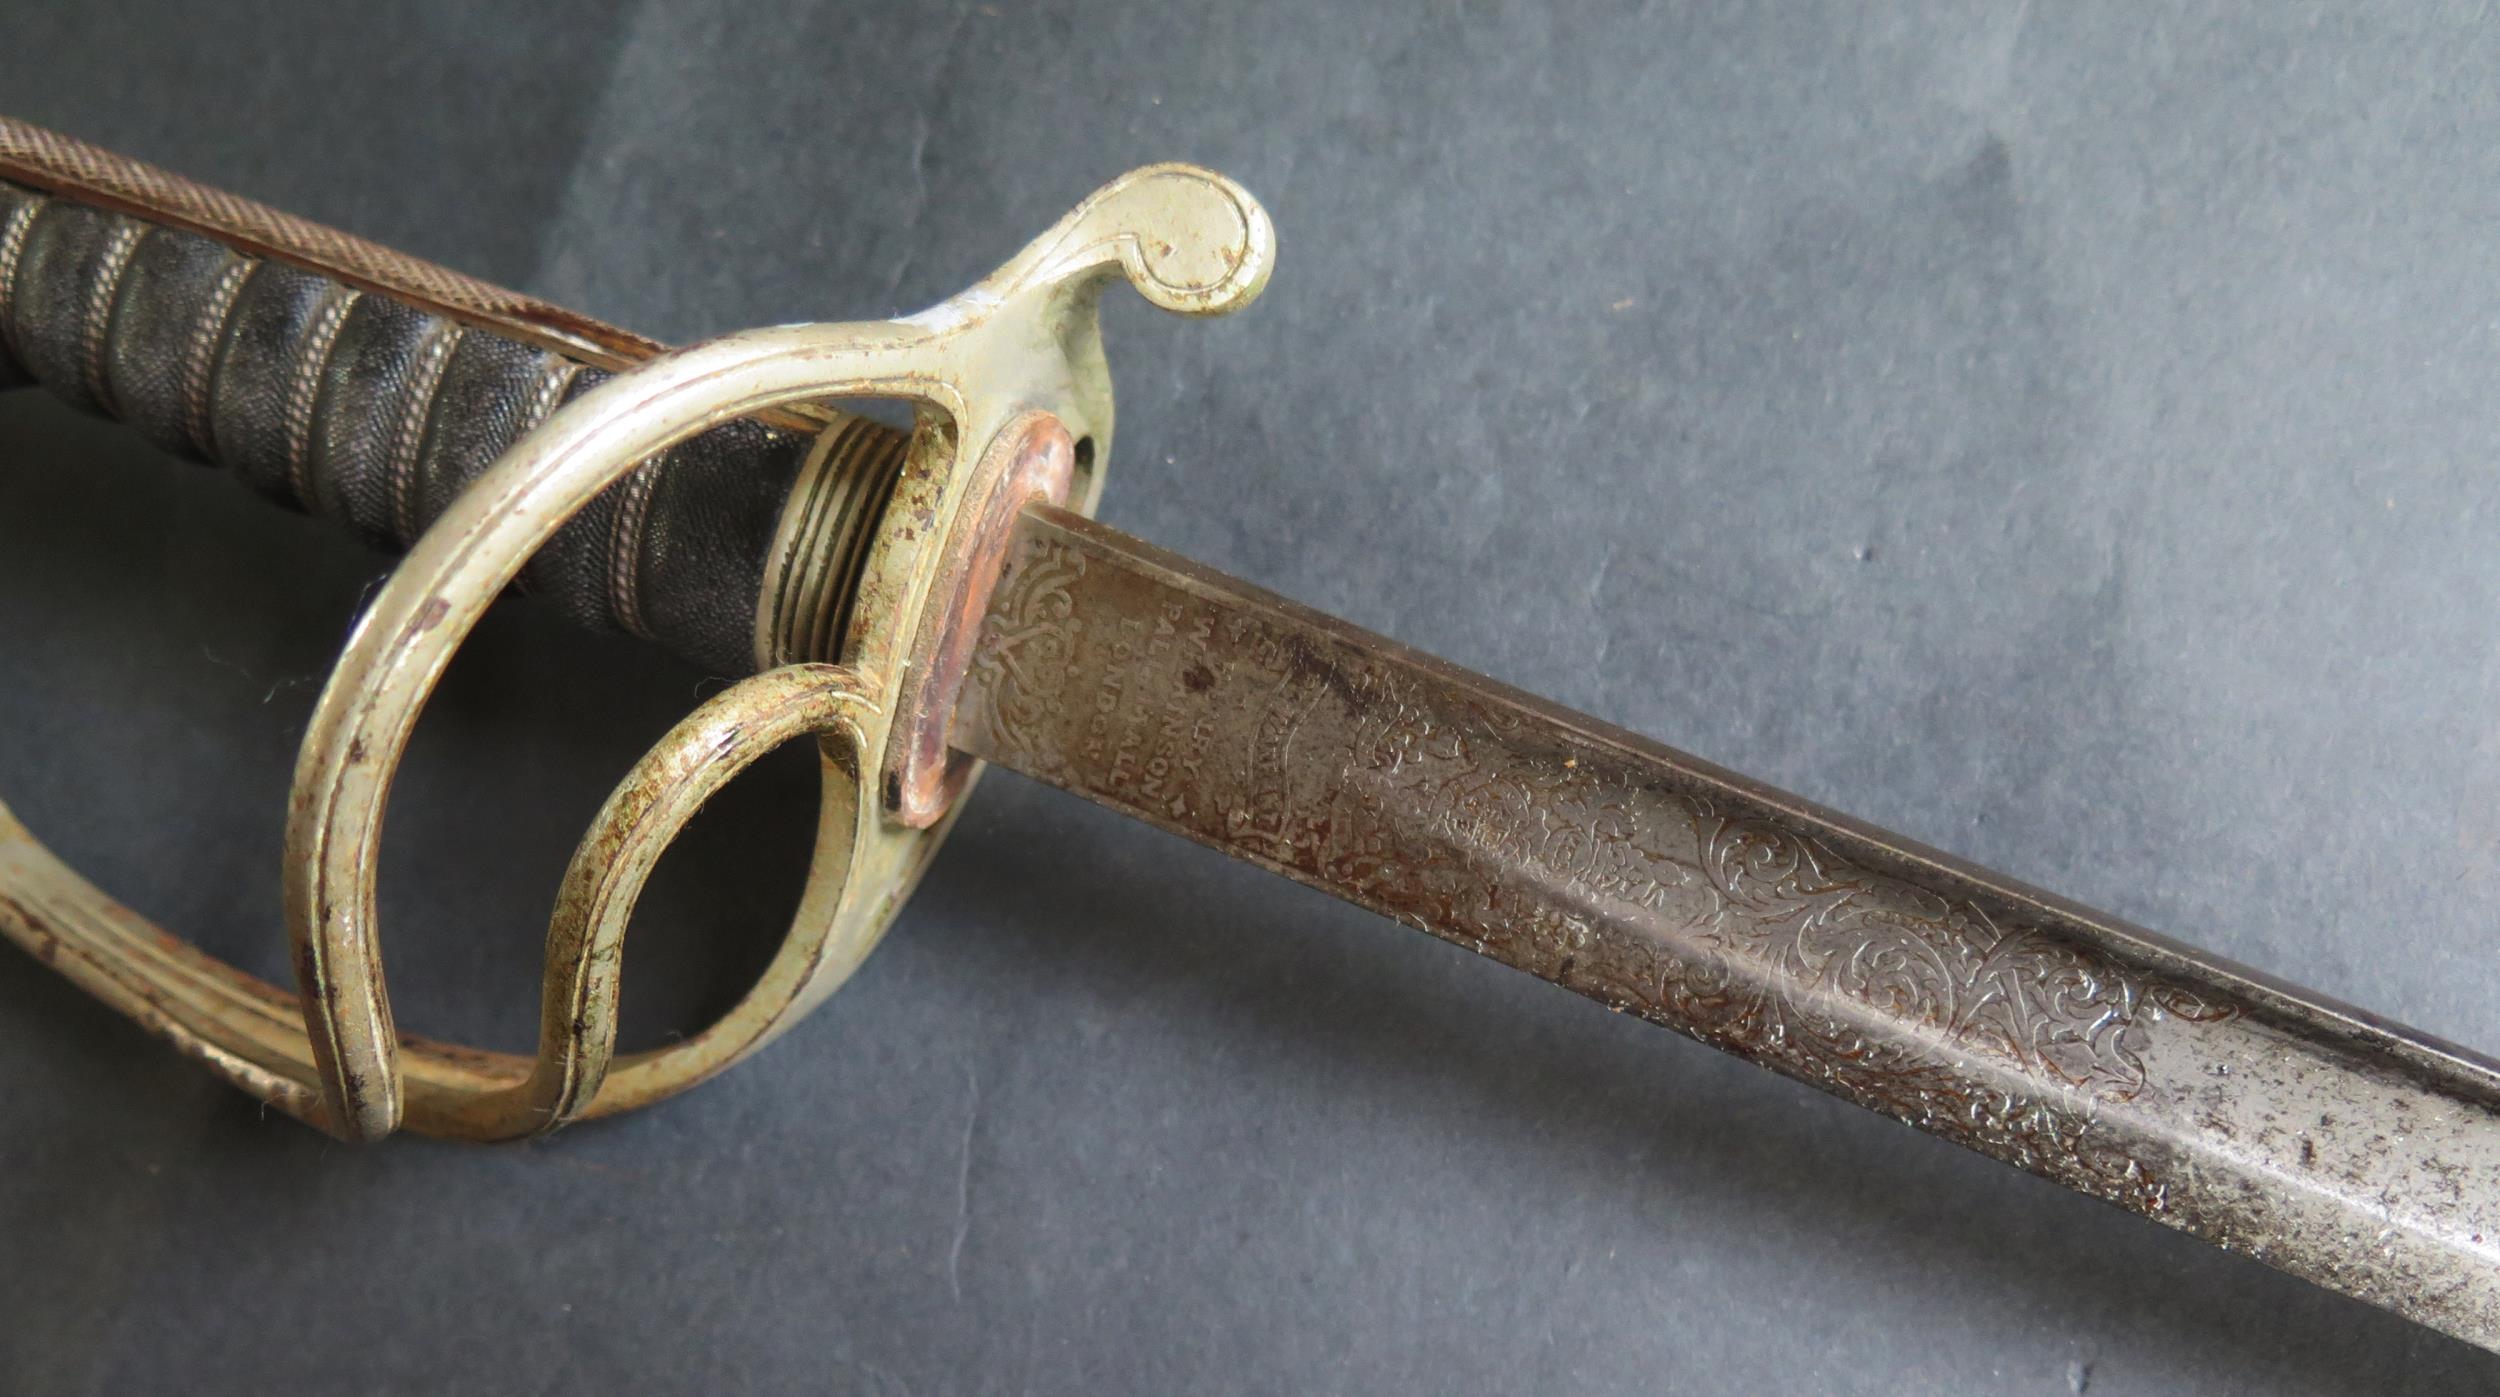 An 1821 Pattern Royal Artillery Officer's Sword by Henry Wilkinson, Pall Mall, London, with engraved - Image 2 of 6